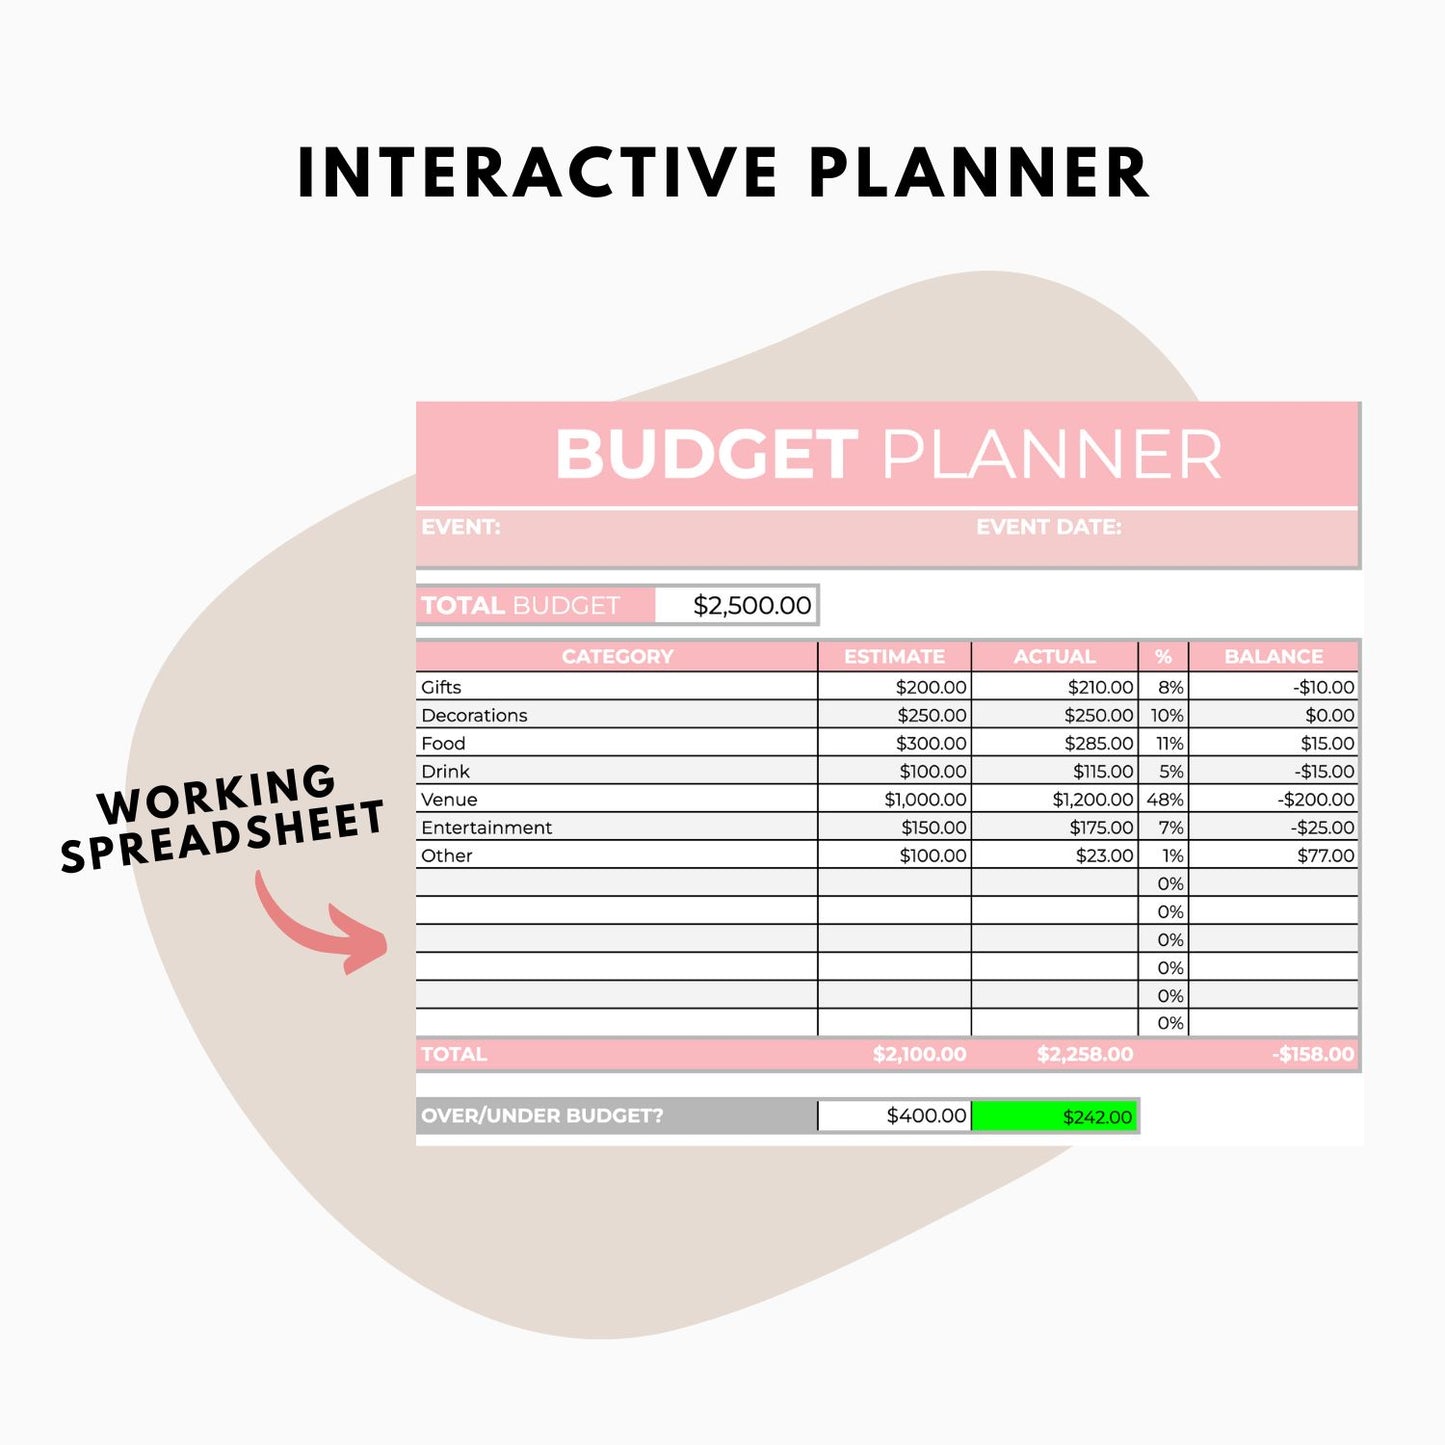 screenshot of the interactive planner for your events budget.